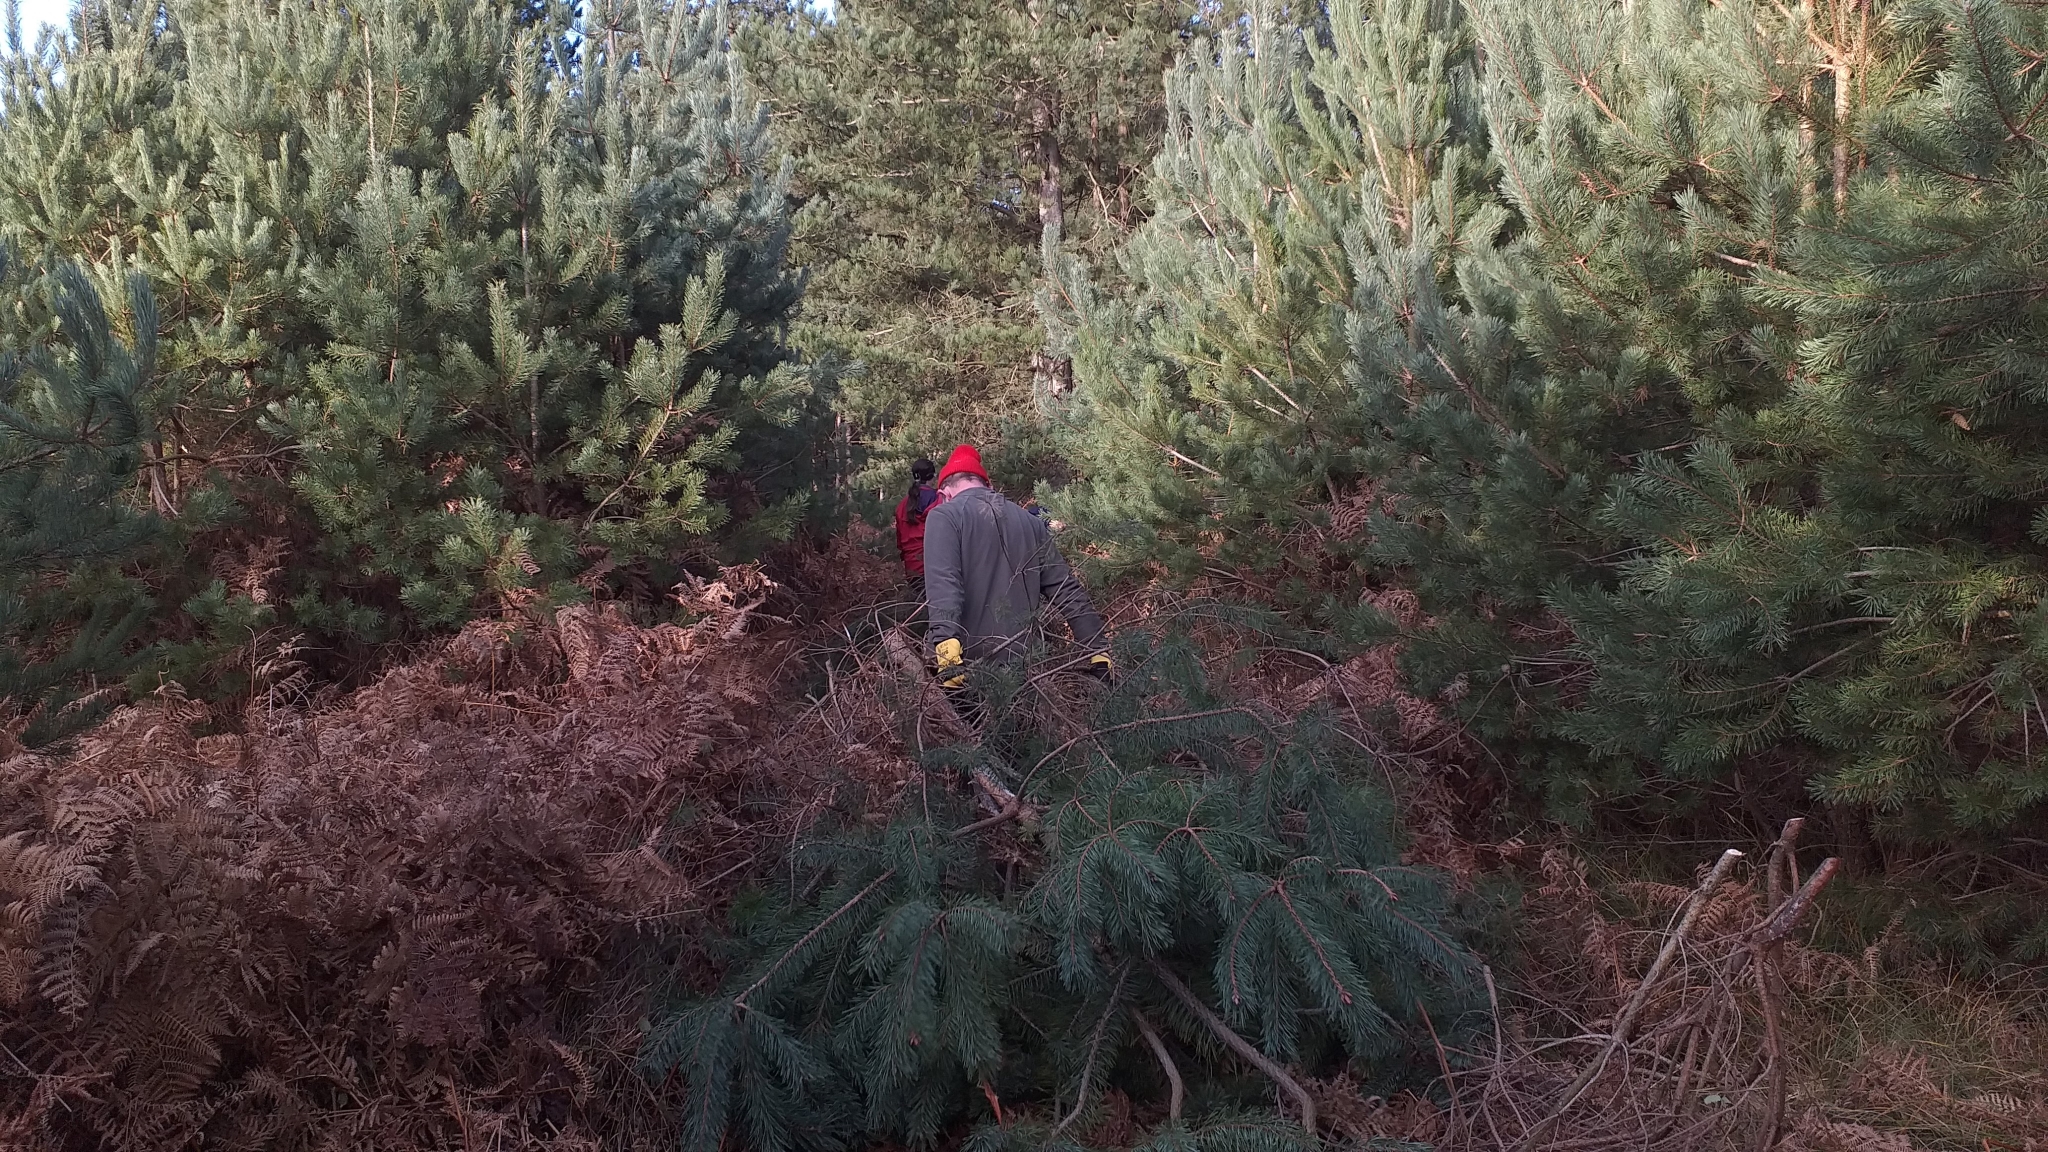 A photo from the FoTF Conservation Event - December 2019 - Self Seeded Pine Tree Removal on the Goshawk Trail : A volunteers drags a removed pine tree away